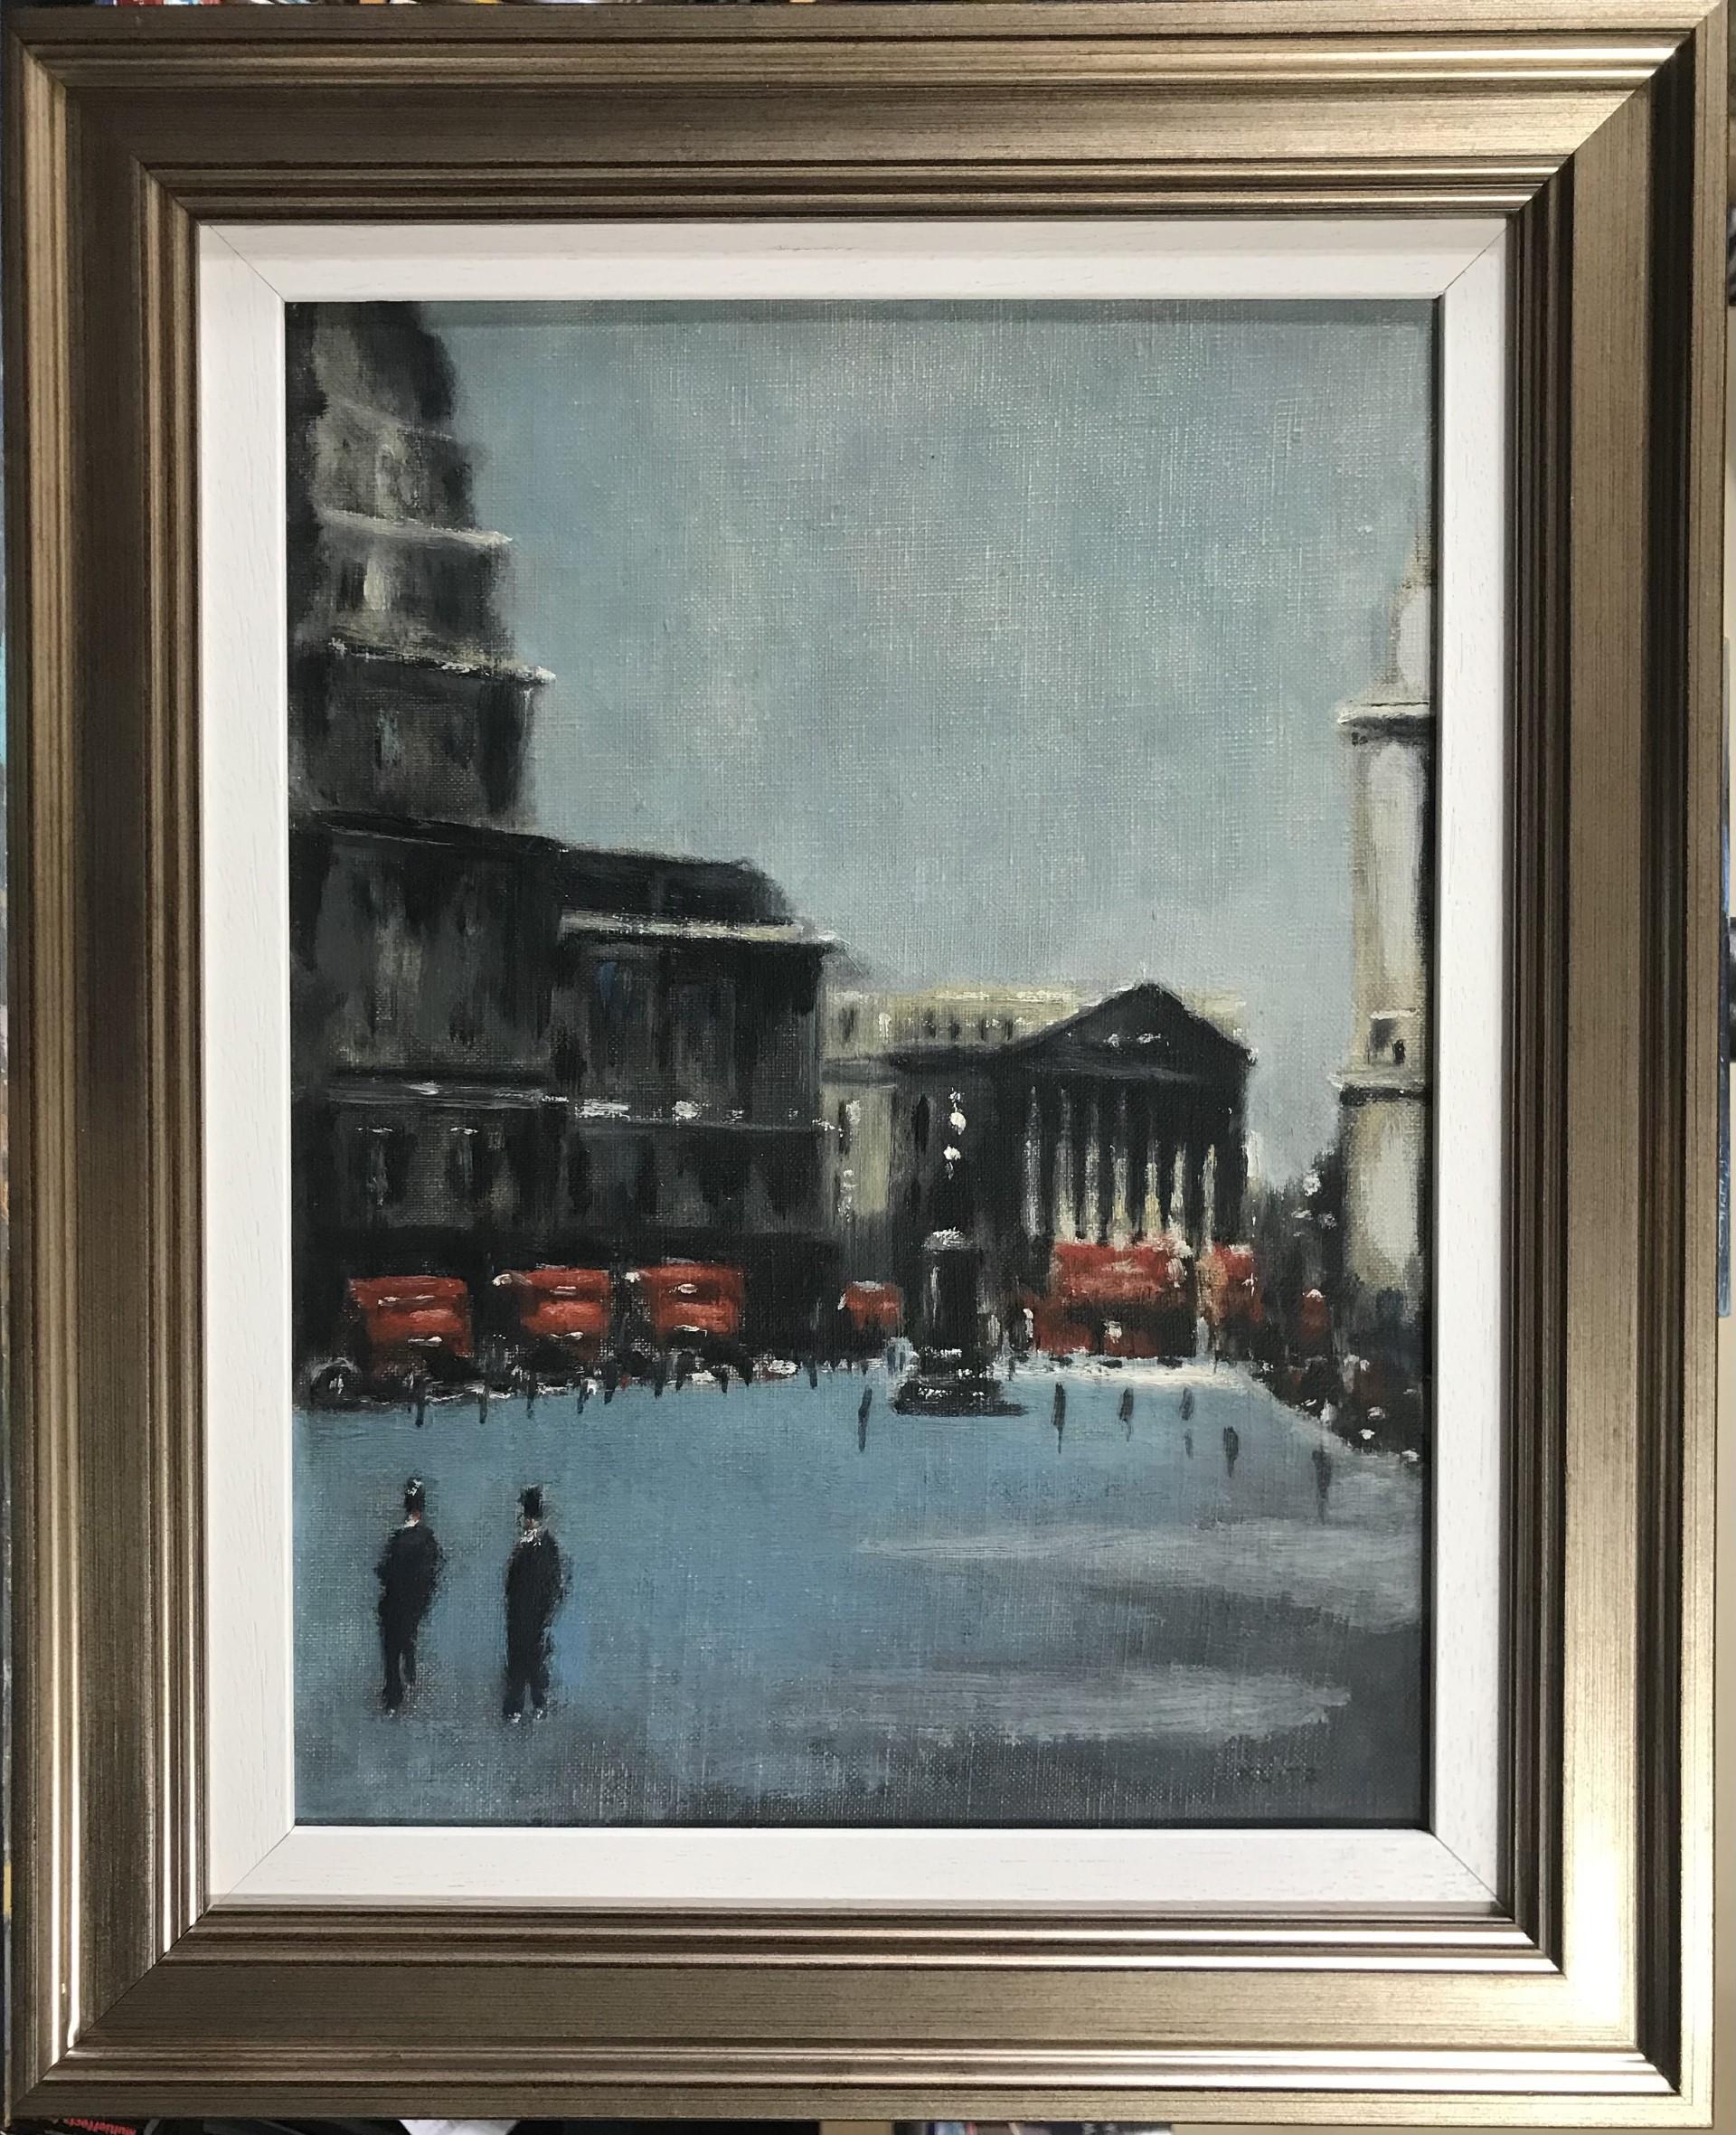 Anthony Klitz Landscape Painting - Piccadilly, London Uk -scene with London red buses, statue, buildings and people